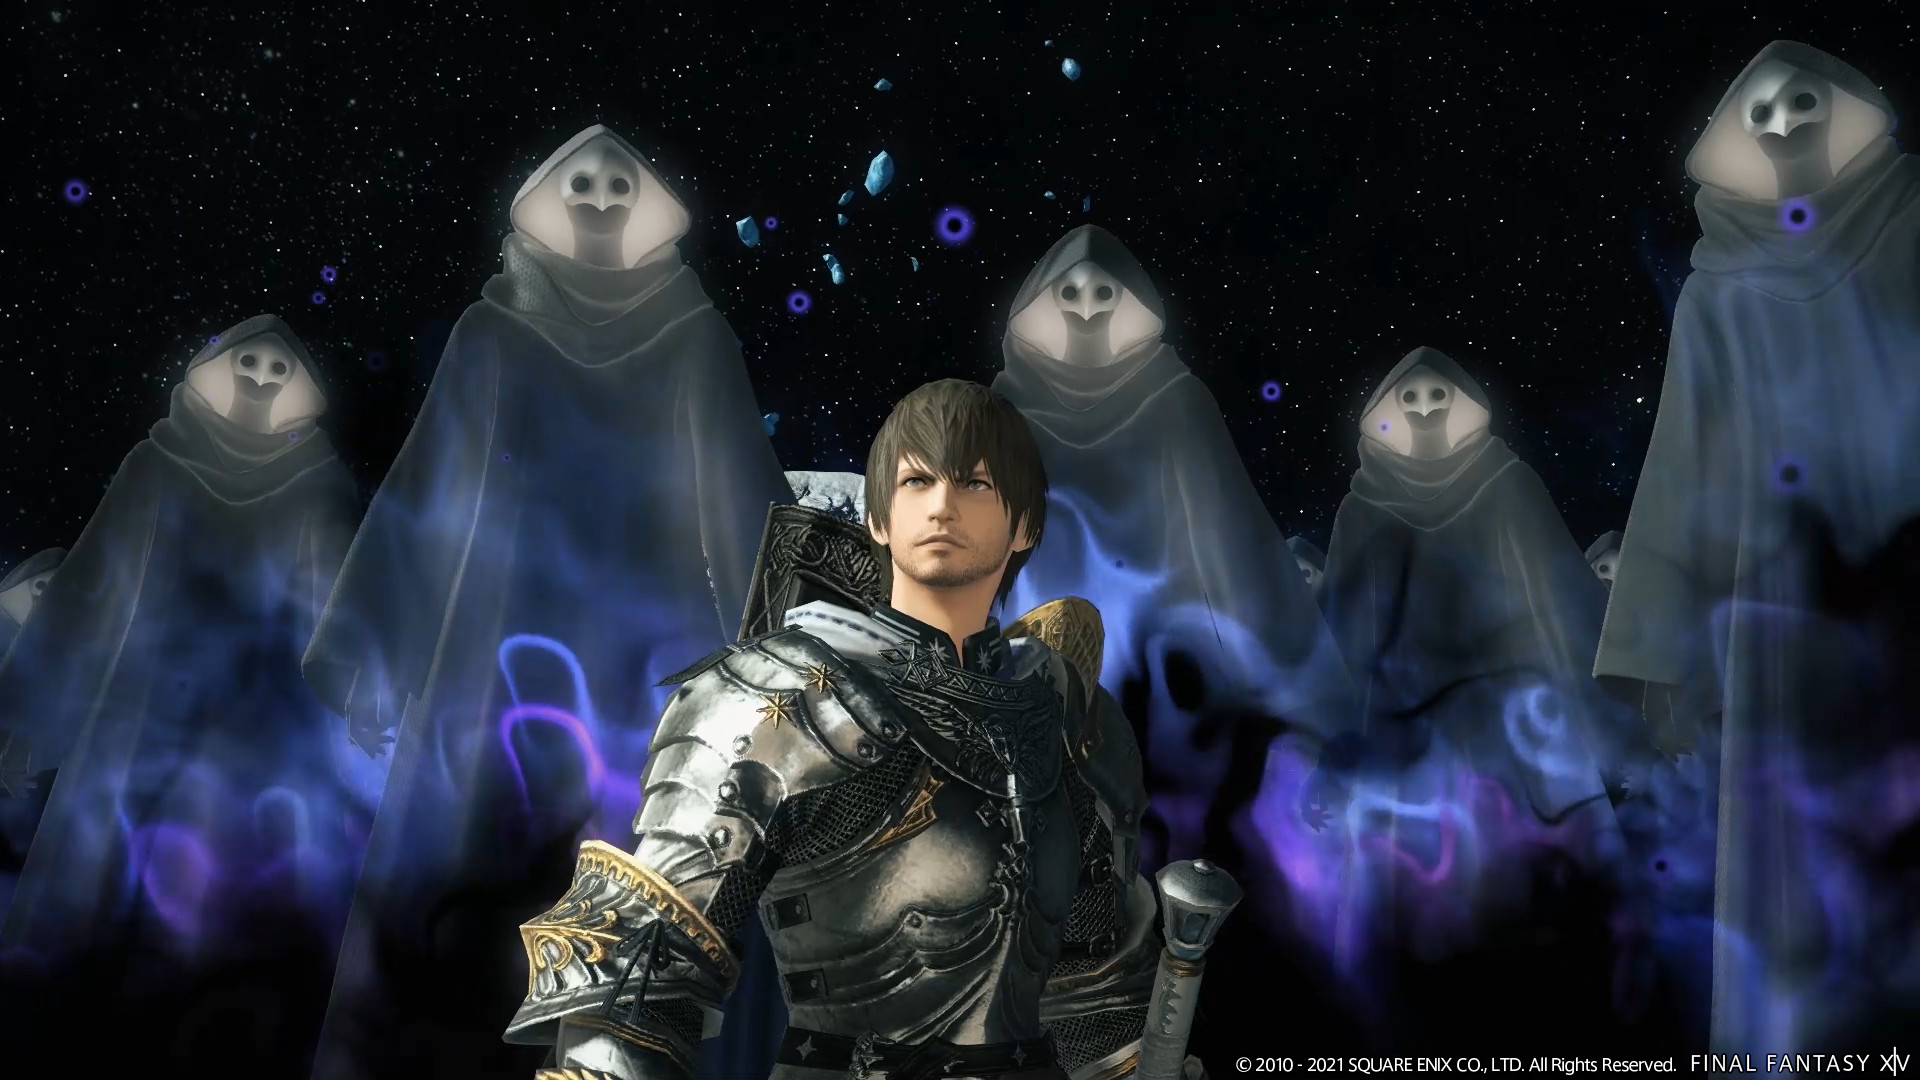 best MMO games: a man in armor surrounded by ghostly apparitions wearing clocks and masks